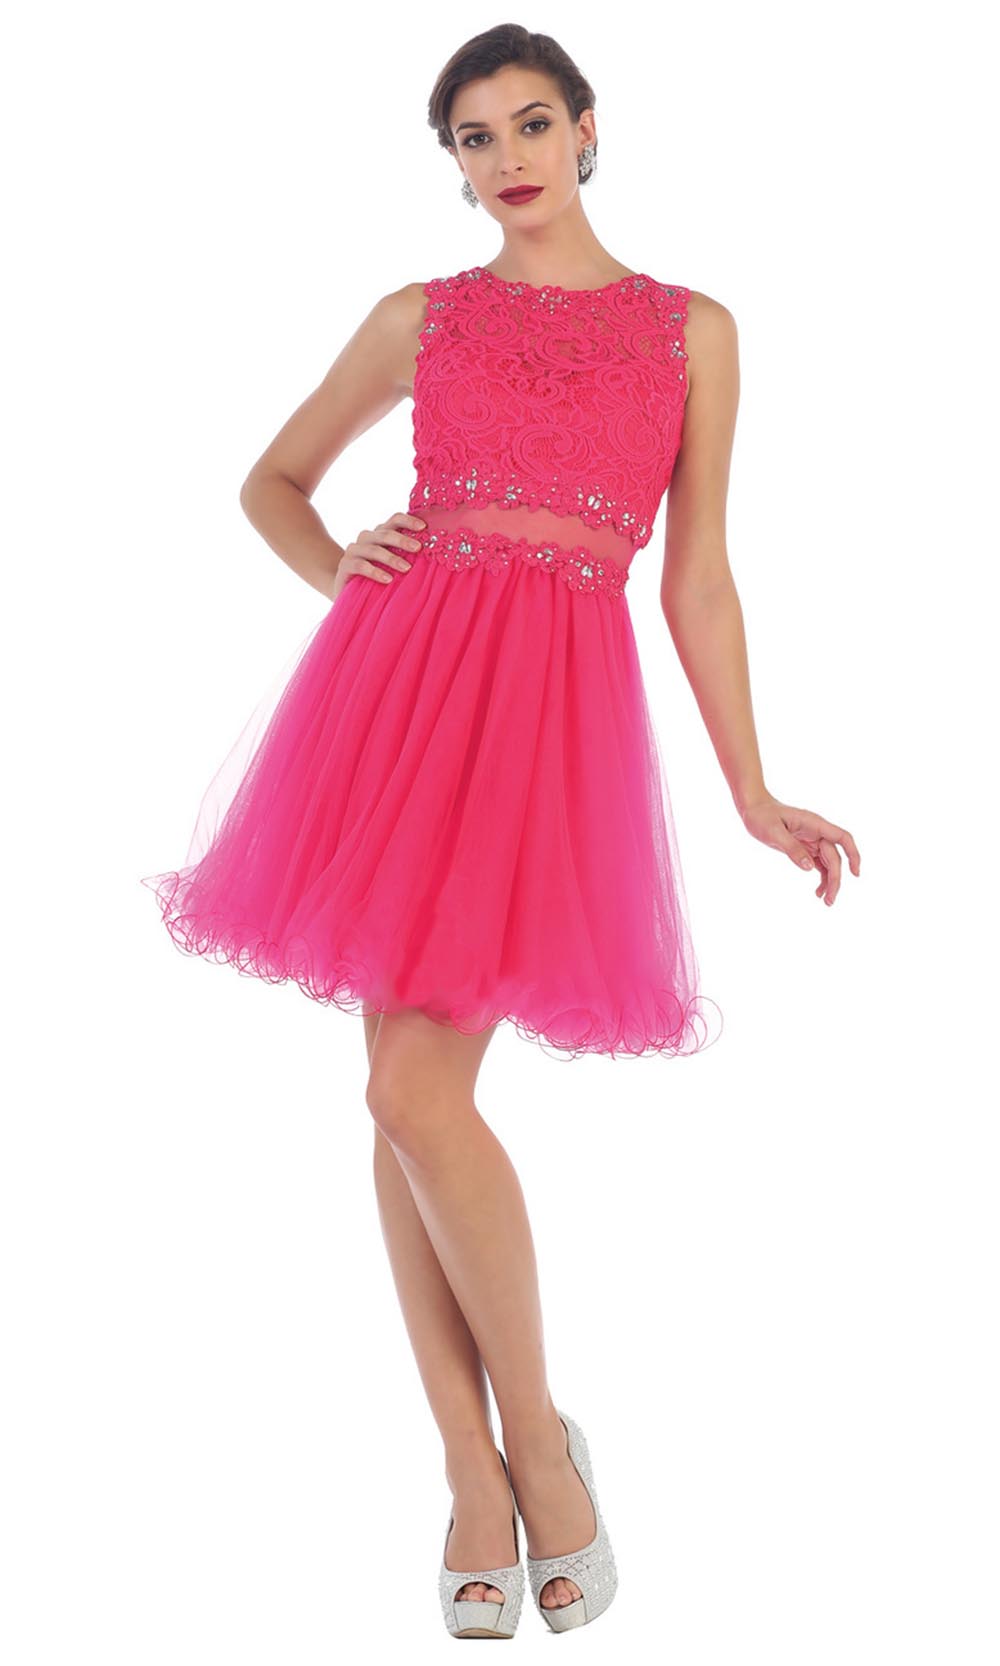 May Queen - MQ1268 Jewel Embroided Cocktail Dress In Pink